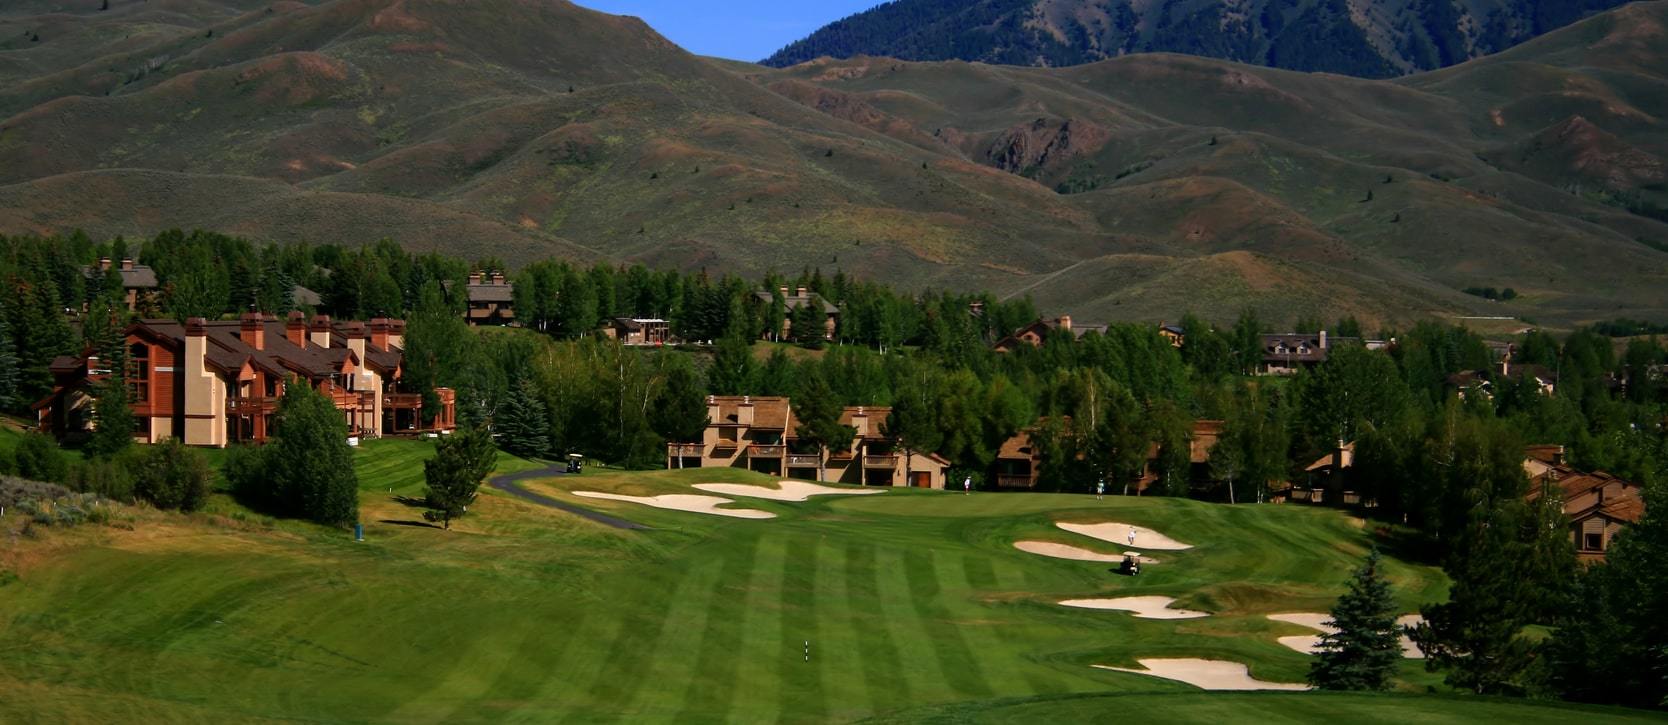 Panoramic view of golf course communities and mountain backdrop in stunning Idaho